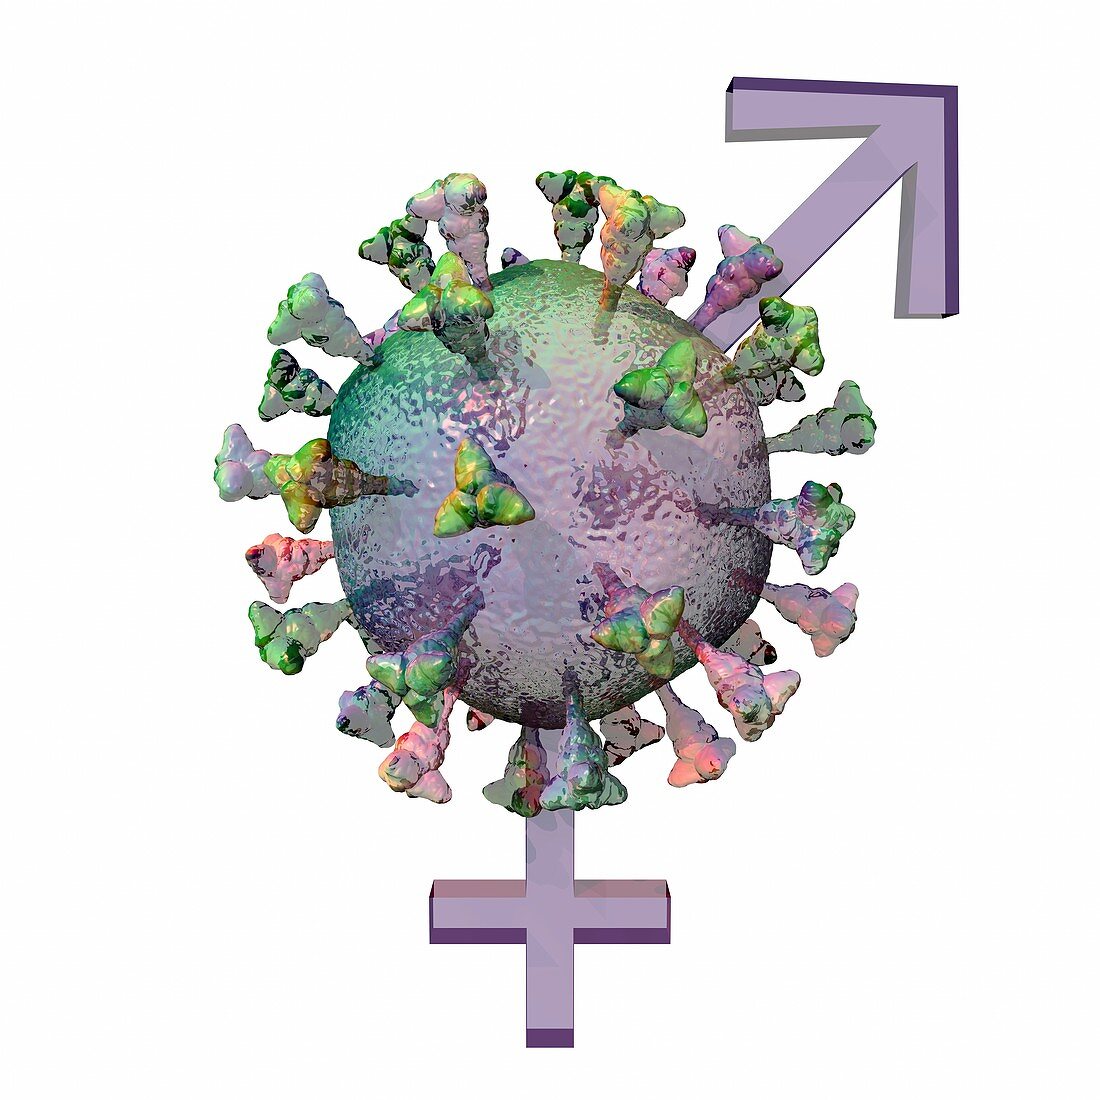 Covid-19 and gender, conceptual illustration